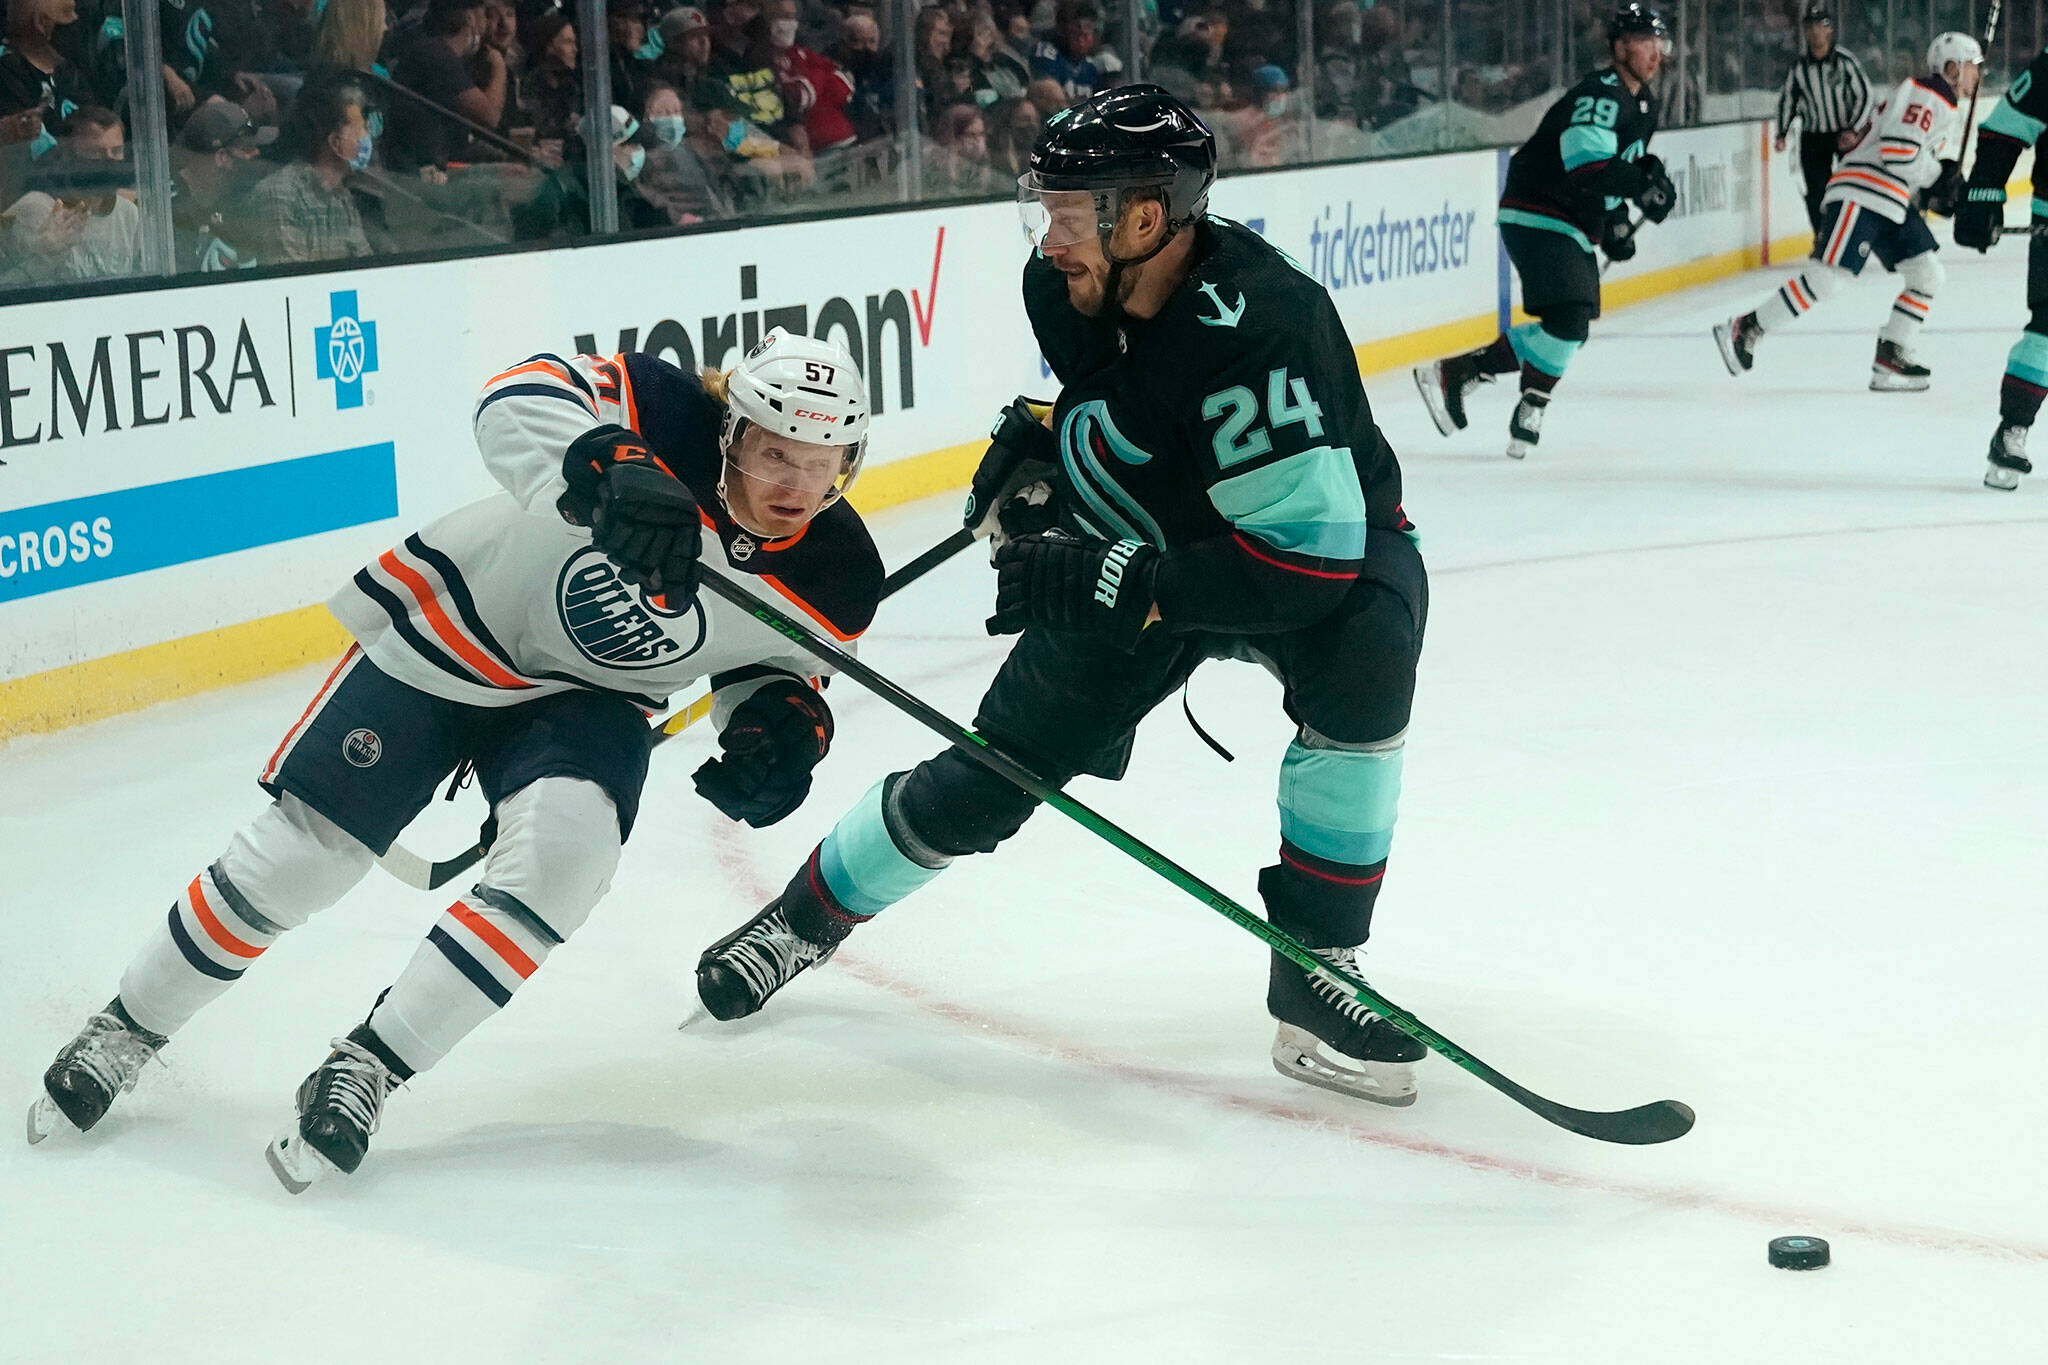 The Oilers’ James Hamblin (left) skates past the Kraken’s Jamie Oleksiak in the first period of a preseason game Friday at Angel of the Winds Arena in Everett. (AP Photo/Elaine Thompson)